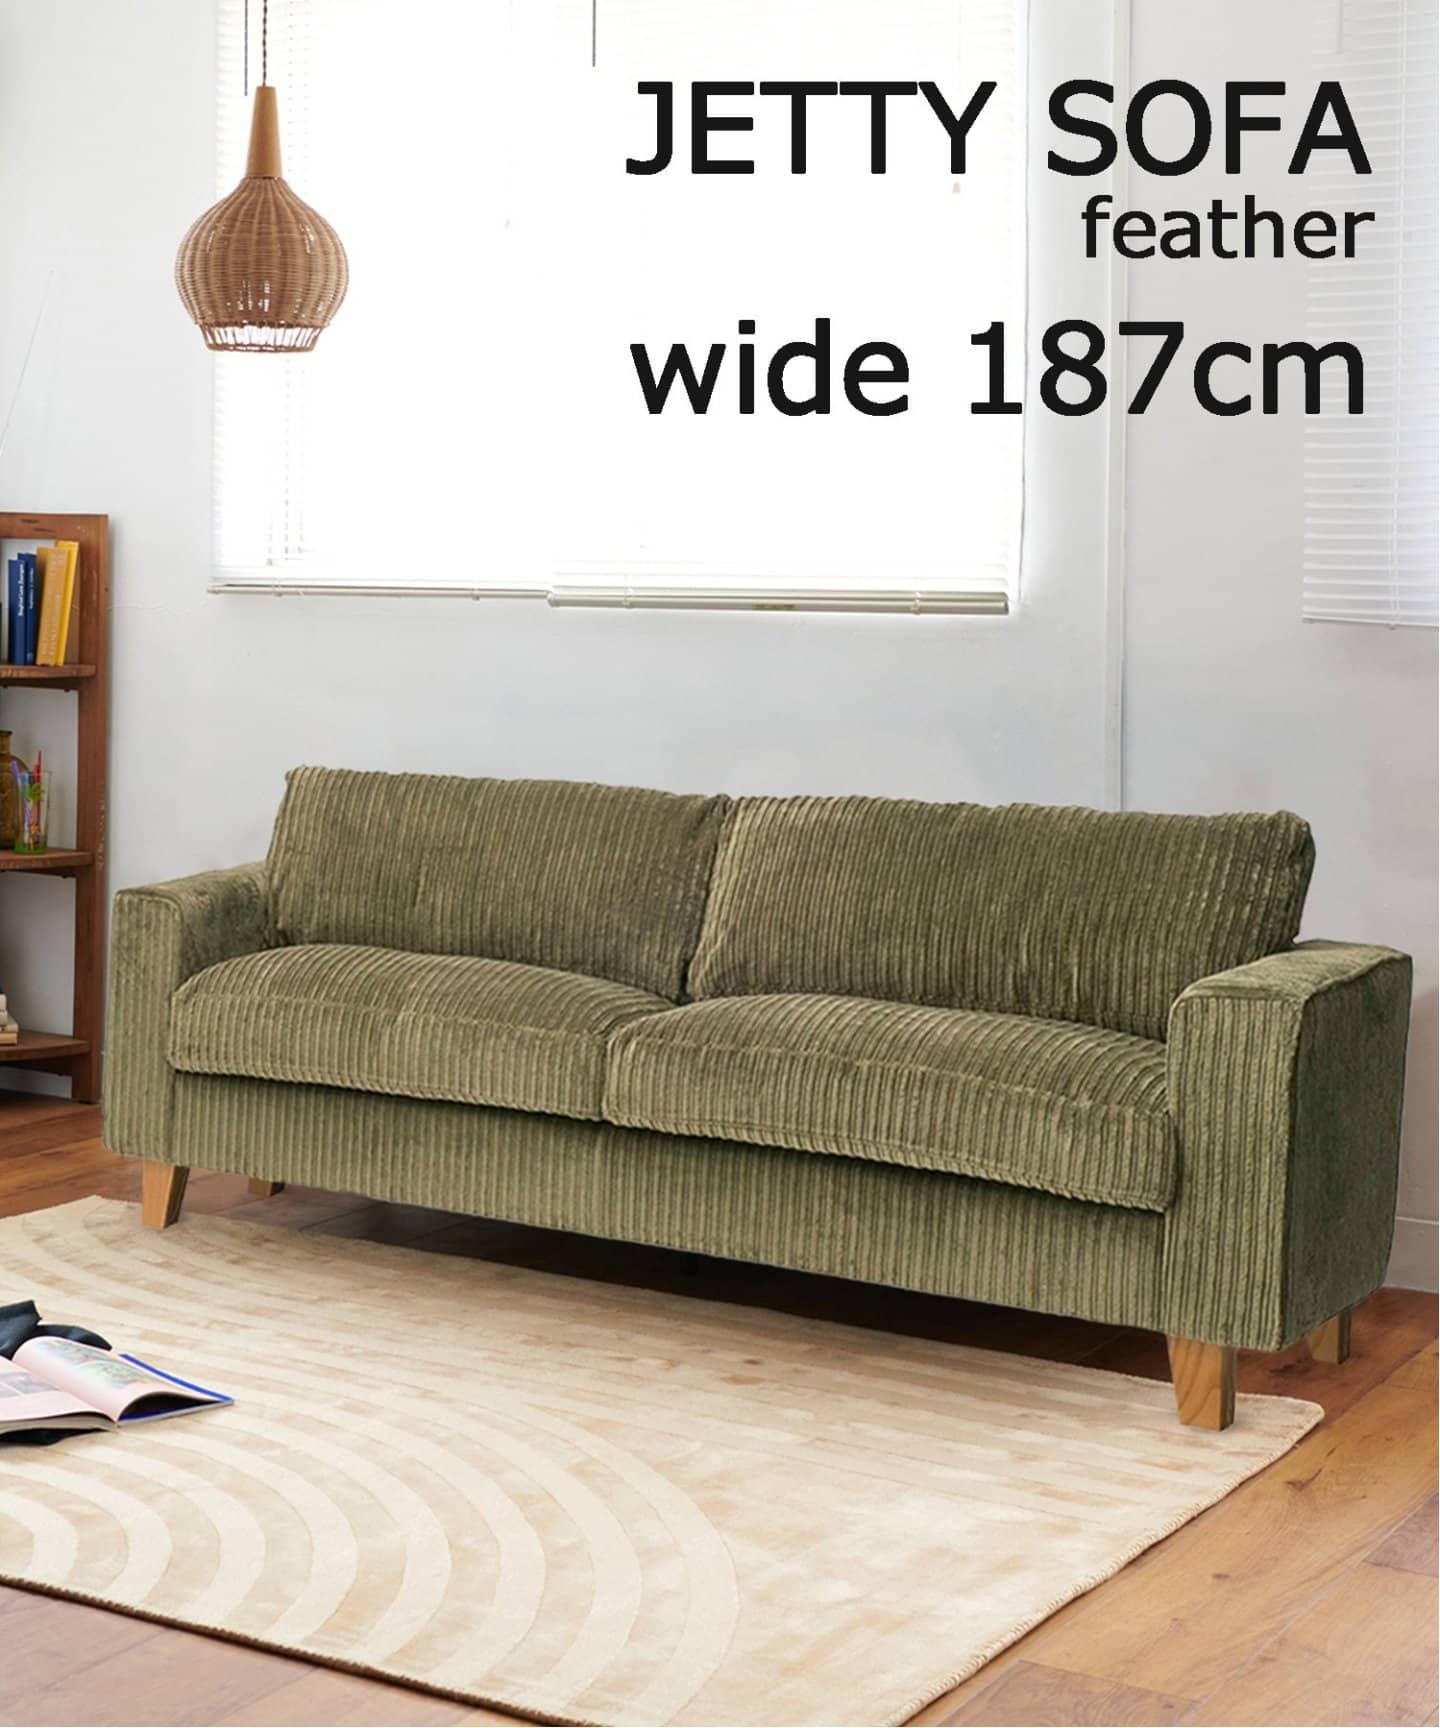 ORDER》JETTY feather SOFA 2.5P W187 AC-07 KH ジェティーフェザー 